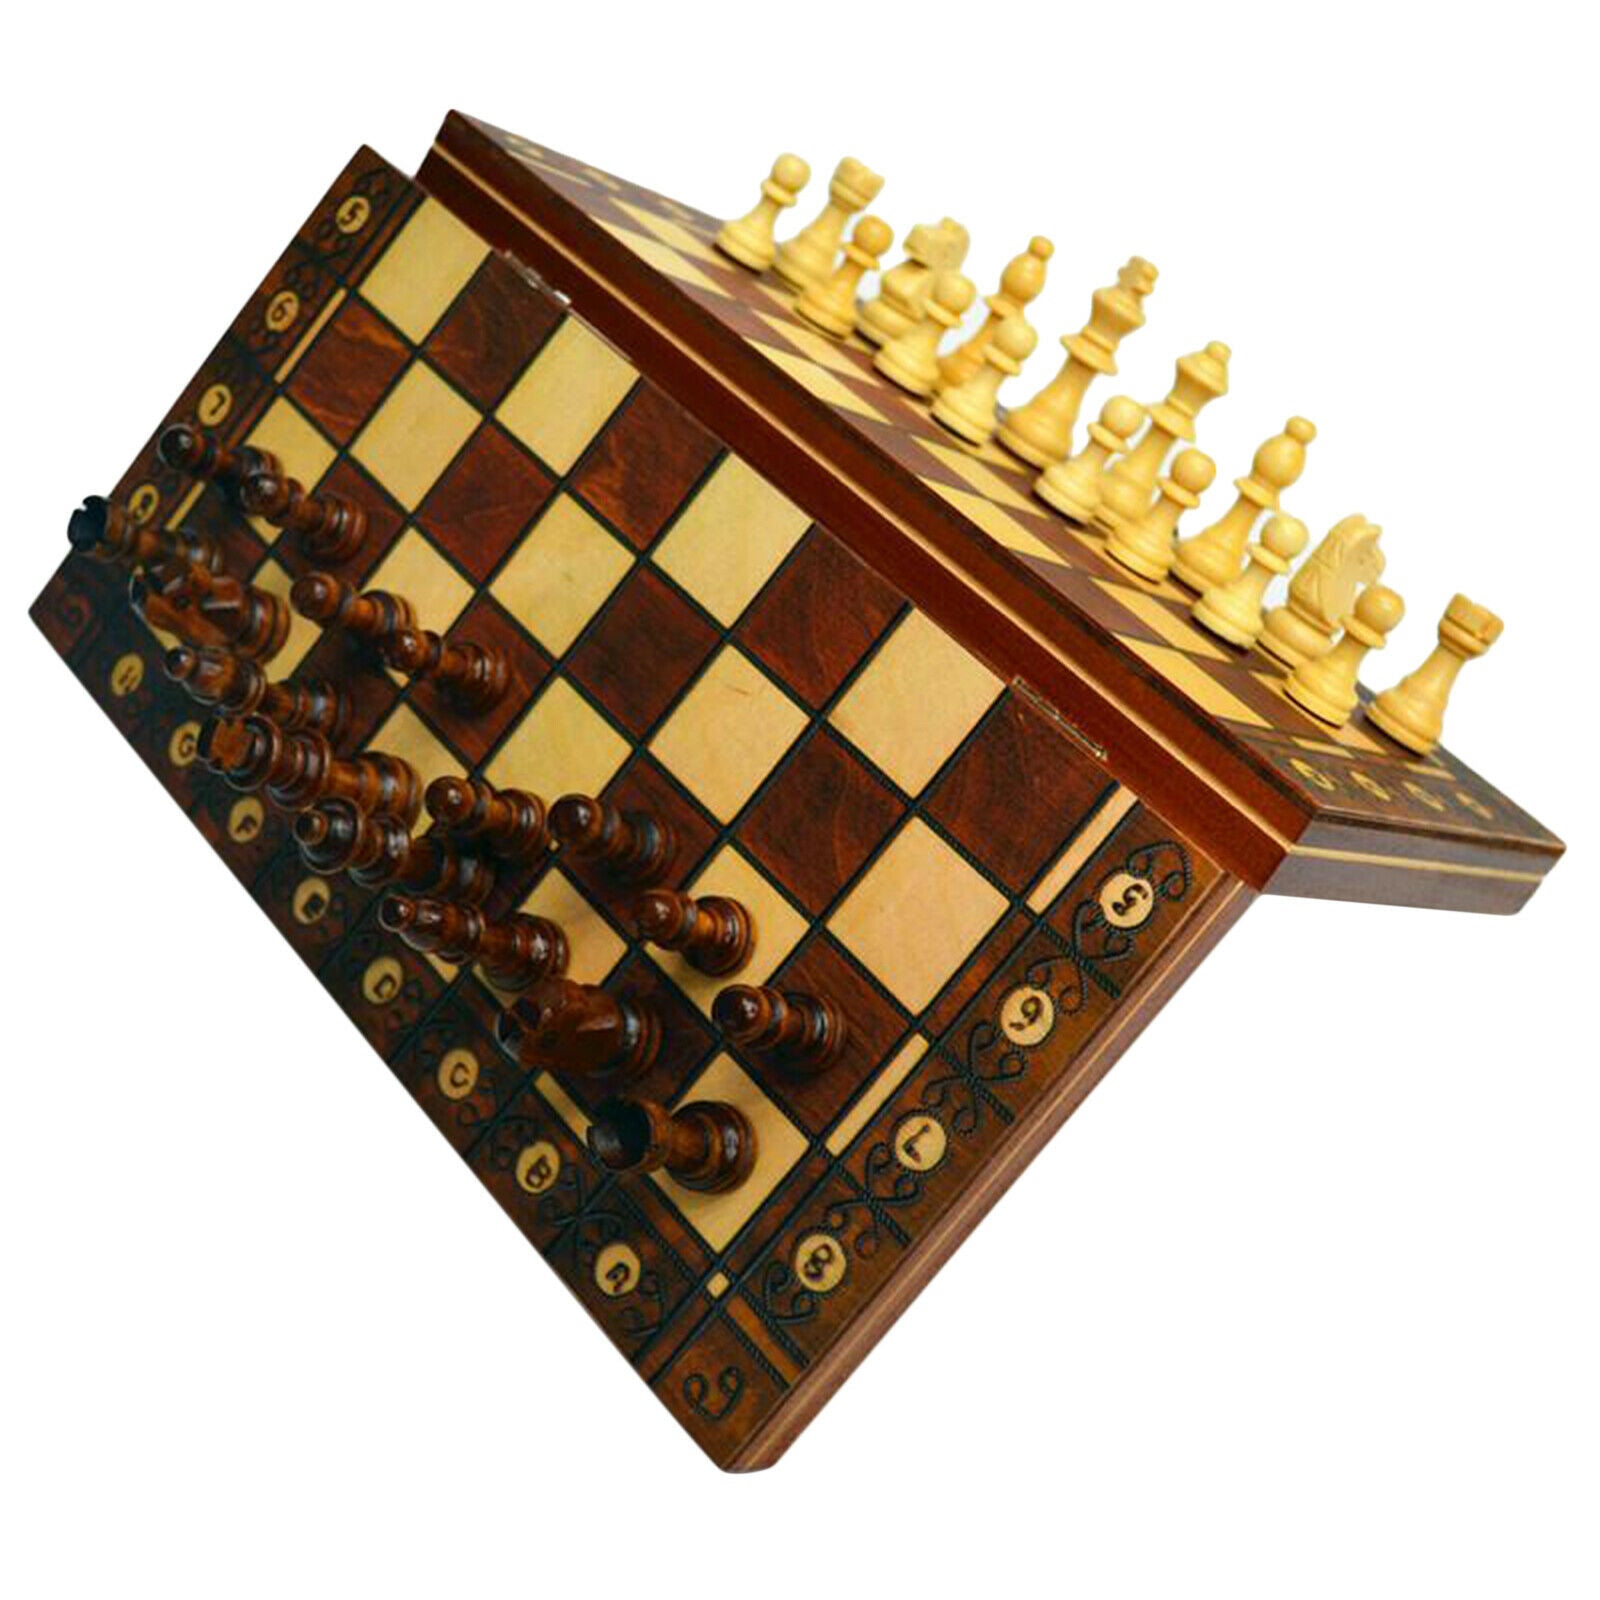 Folding Magnetic Wooden Chess Set 3 in 1 Handcrafted 15" Chess Board Toys